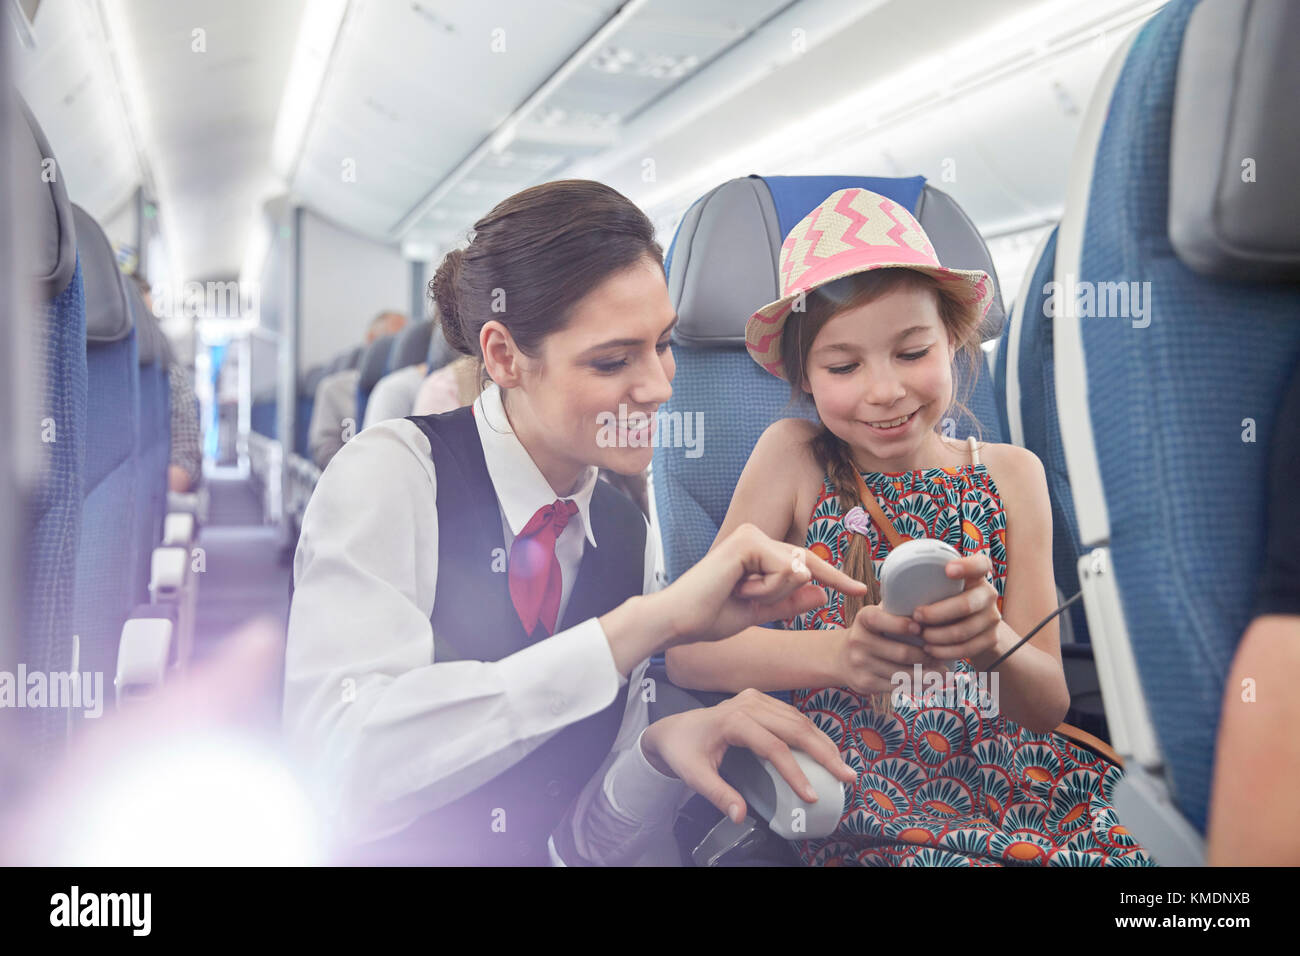 Flight attendant helping girl passenger with remote control on airplane Stock Photo